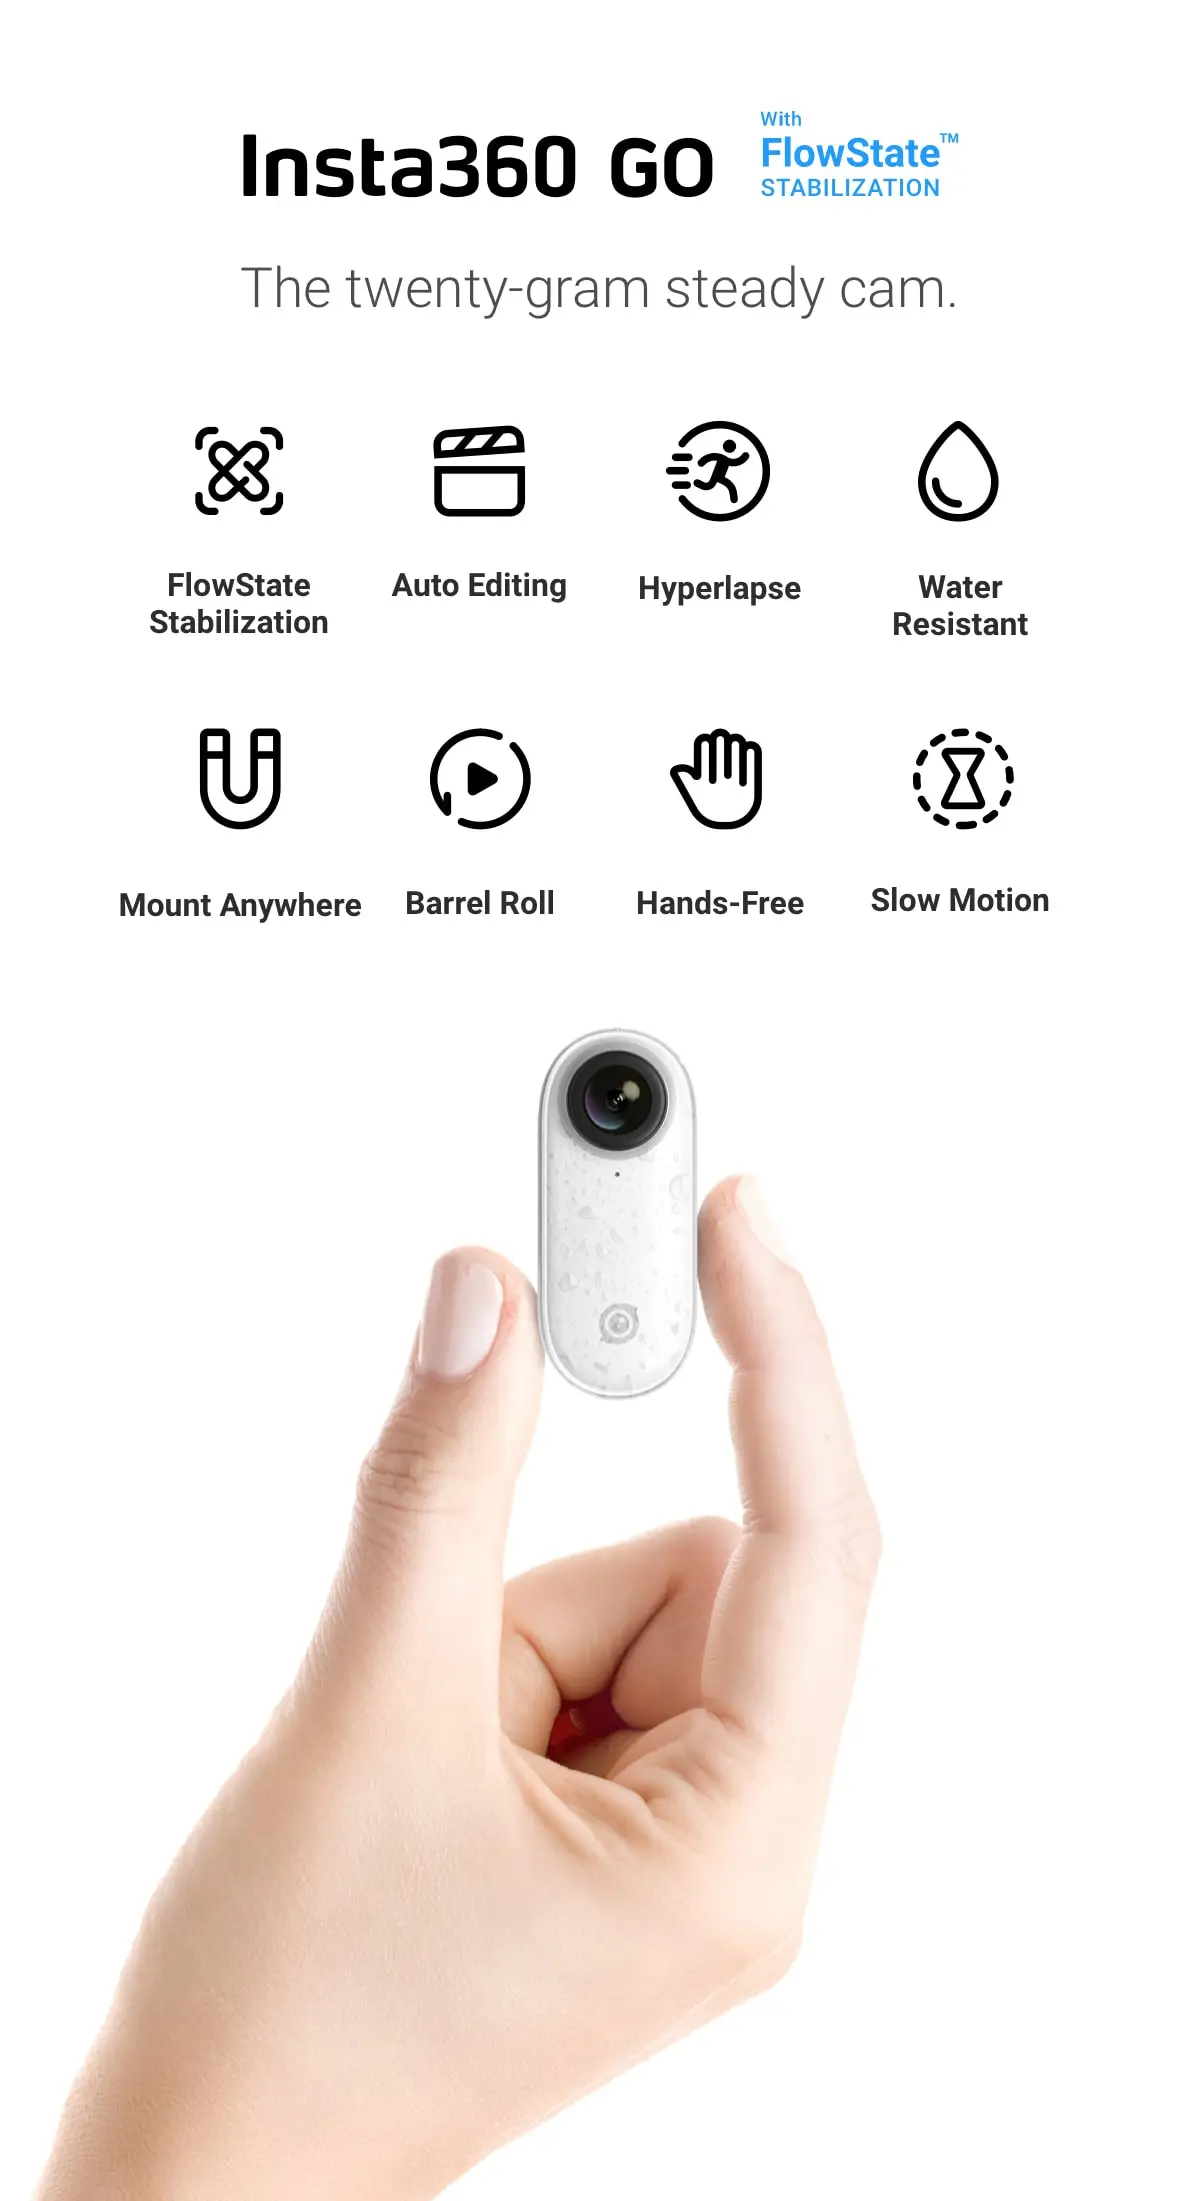 Insta 360 Go Smallest Stabilized Twenty-gram Steady Camera For Iphone Ipad   Android - Buy 360 Go,Insta 360 Go,Action Camera Product on Alibaba.com